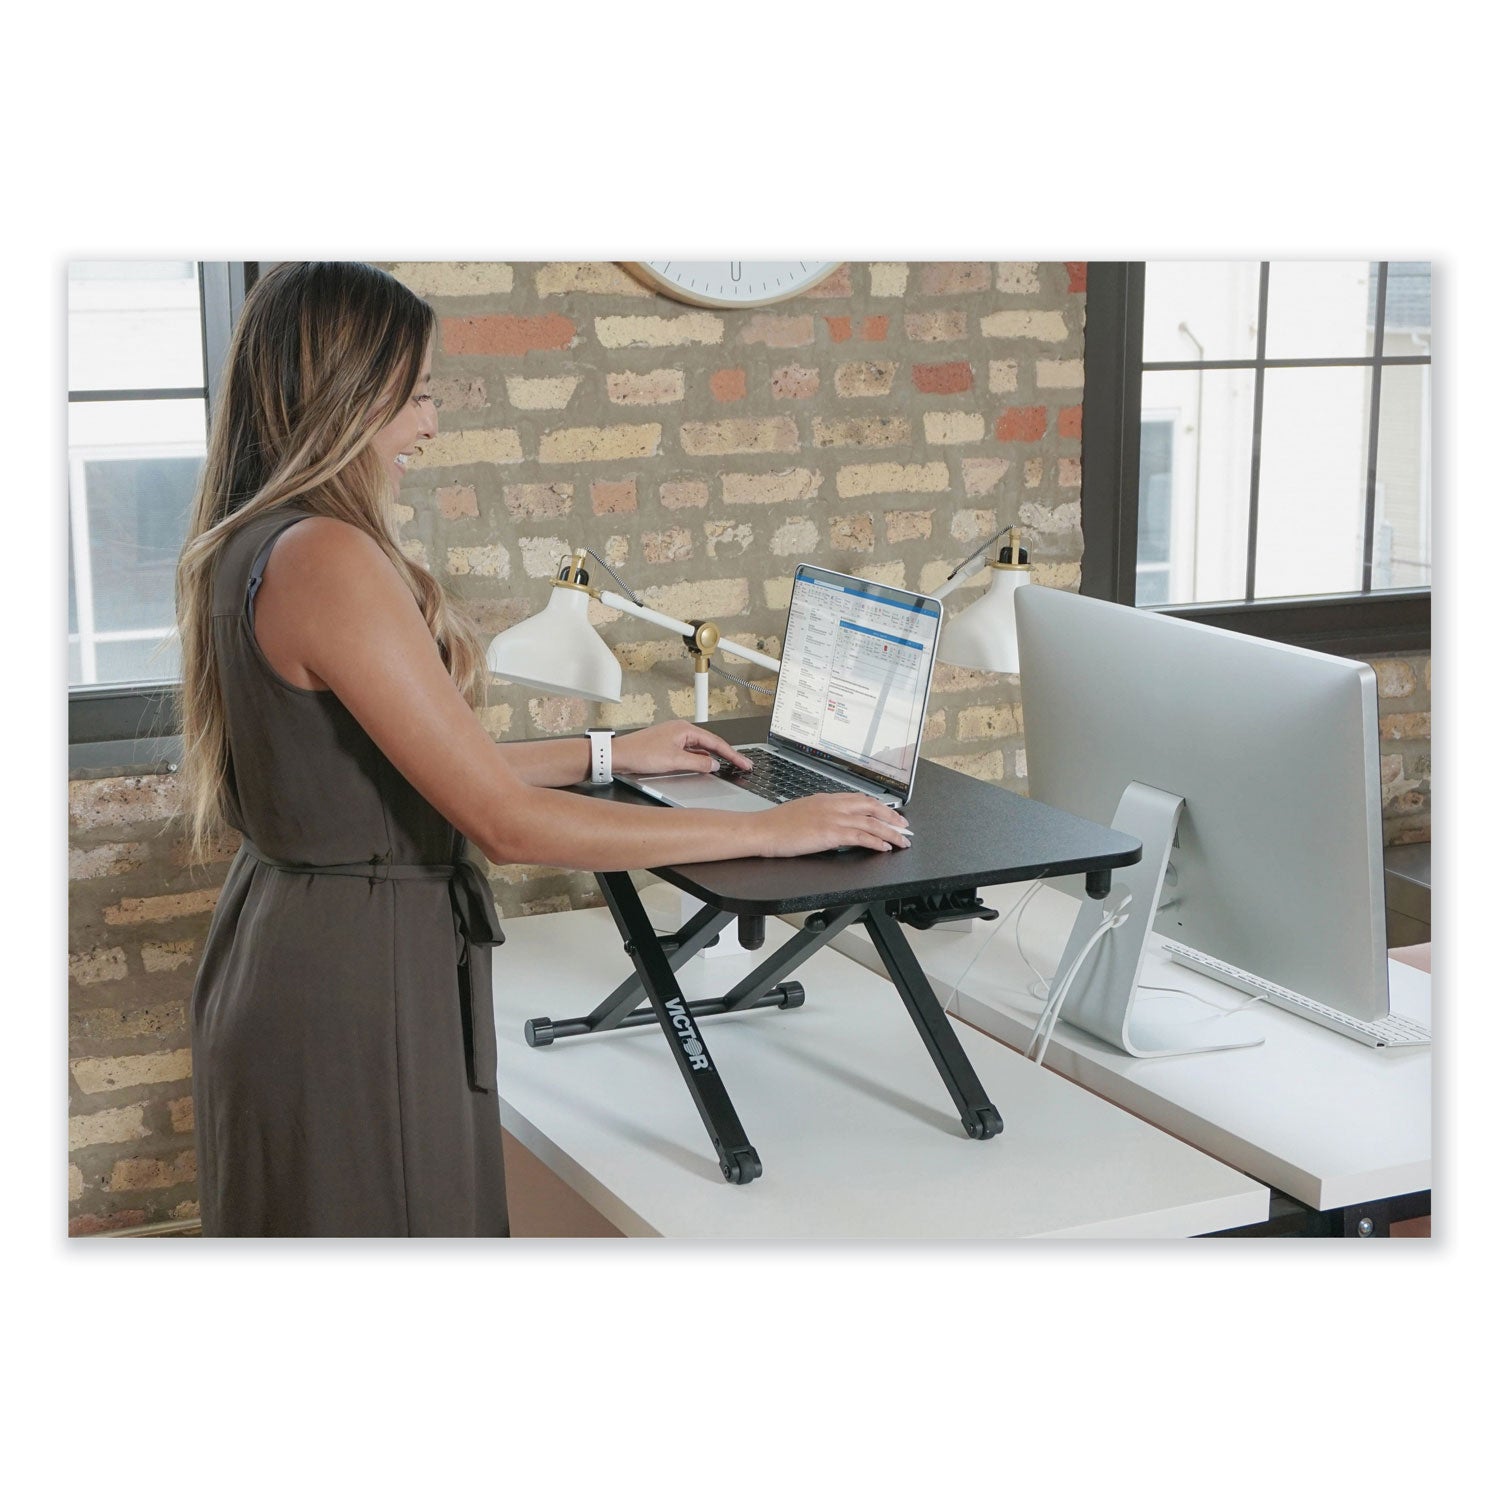 height-adjustable-laptop-standing-desk-288-x-185-x-26-to-16-black-ships-in-1-3-business-days_vctdcx110 - 7